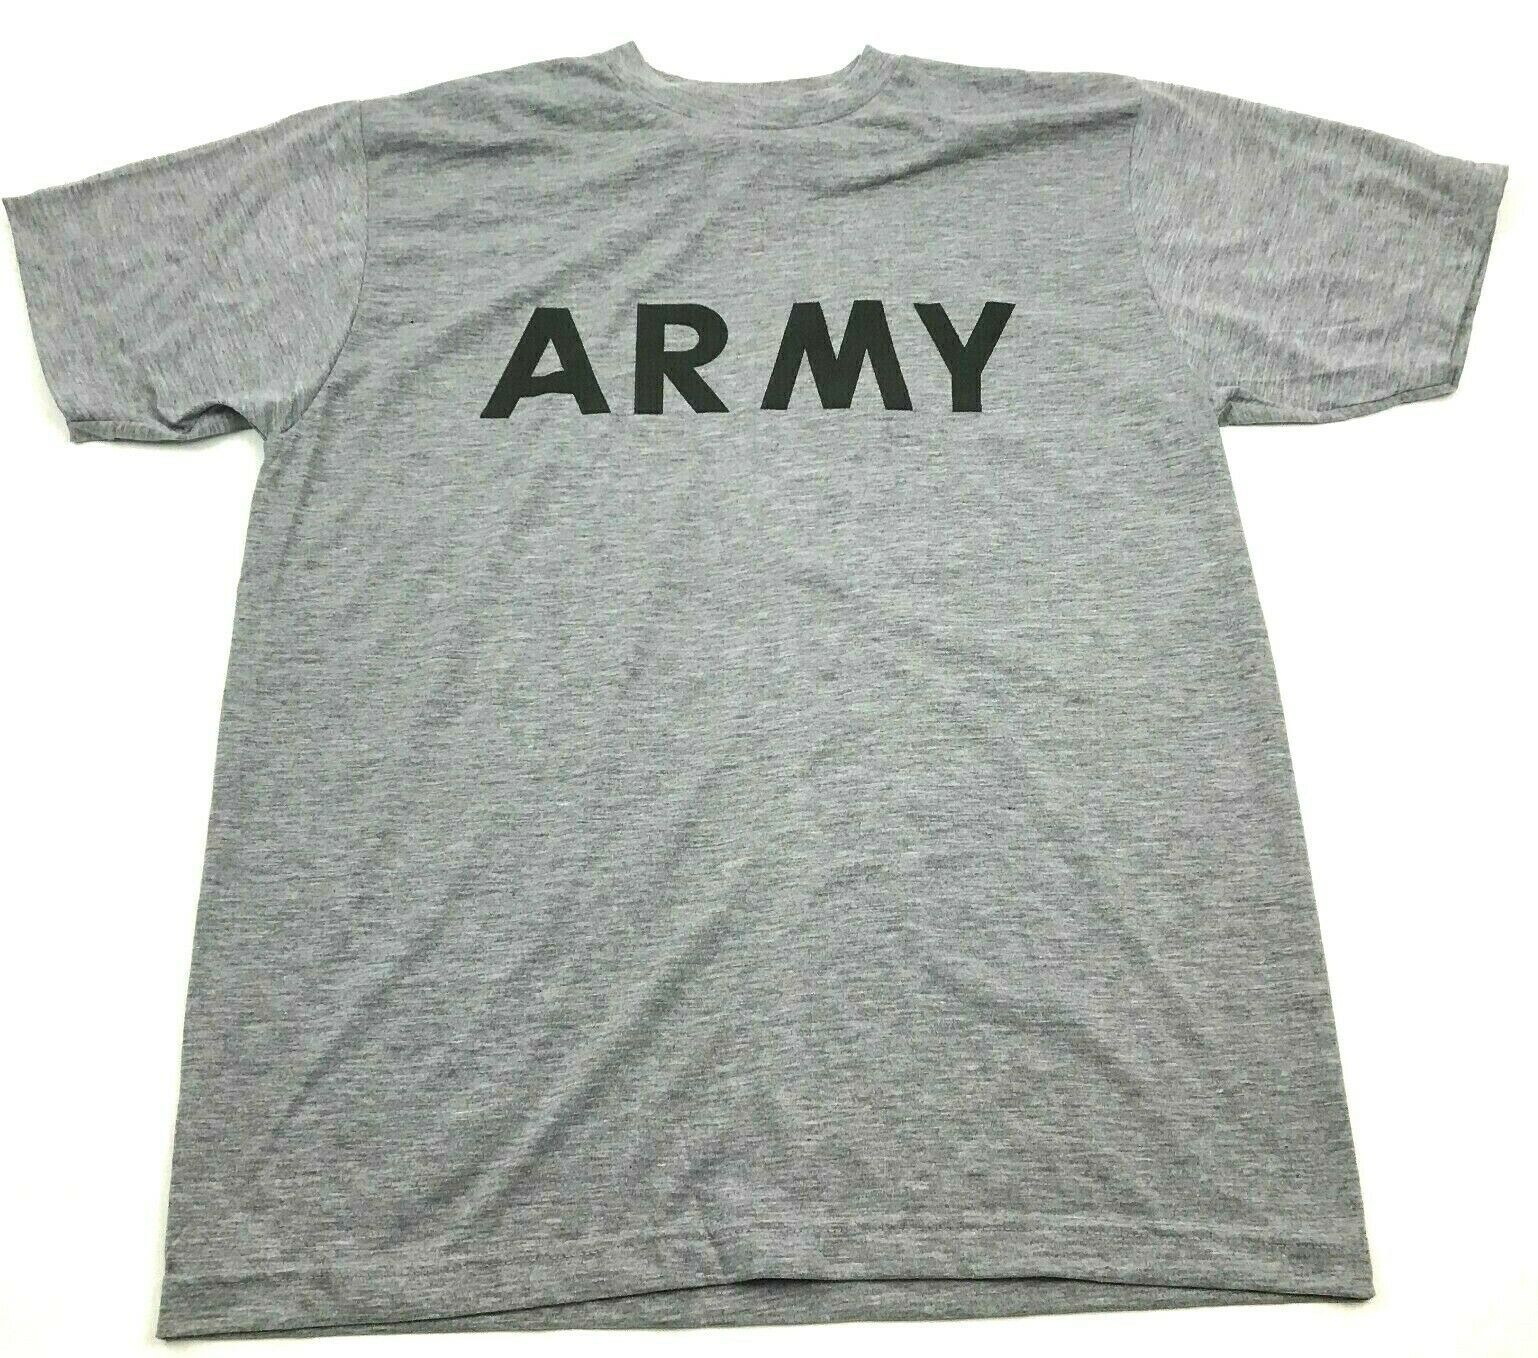 NEW Army Physical Training PT Shirt Size Medium M Gray 3M Safety Reflective IPFU - Activewear Tops